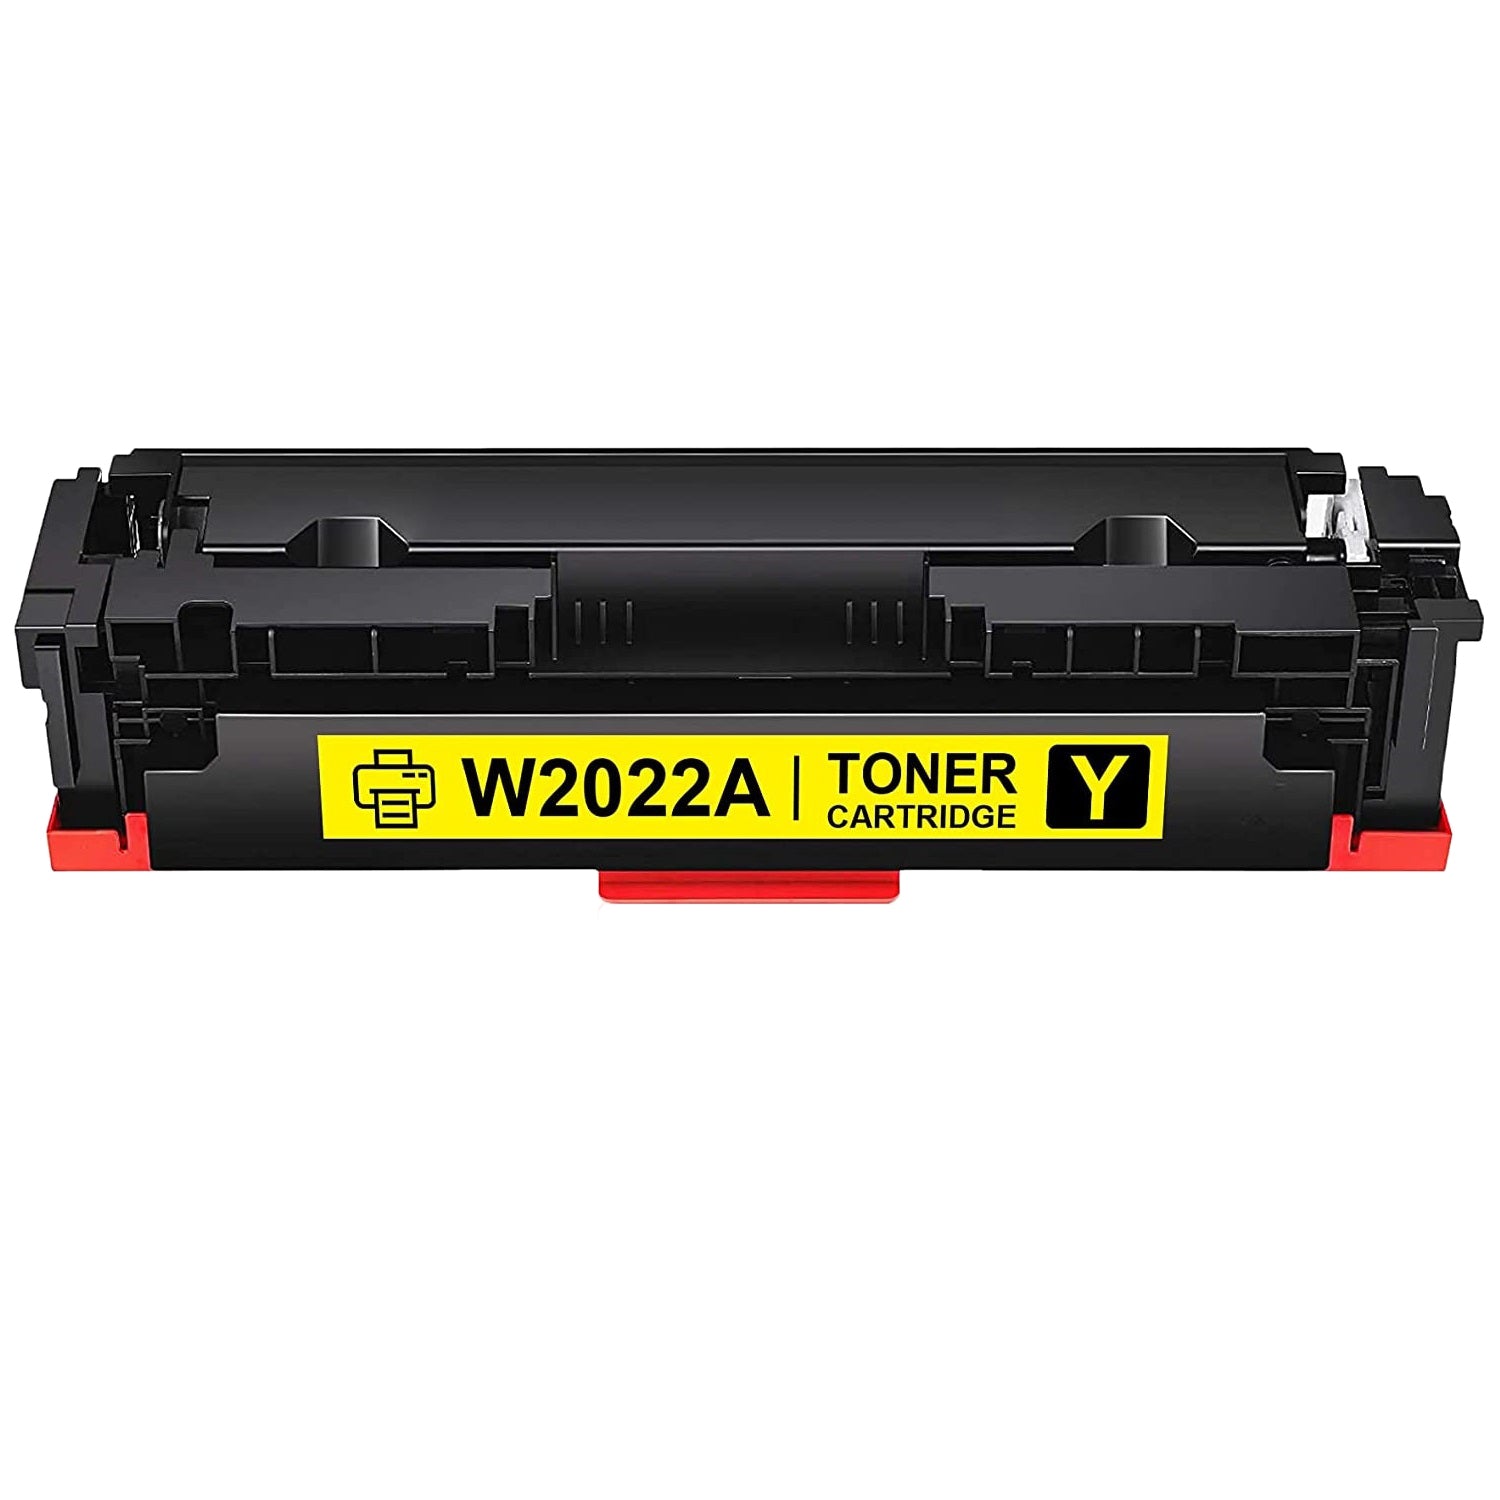 Absolute Toner Compatible HP W2022A / 414A Yellow Laserjet Toner Cartridge (With Chip) By Absolute Toner HP Toner Cartridges